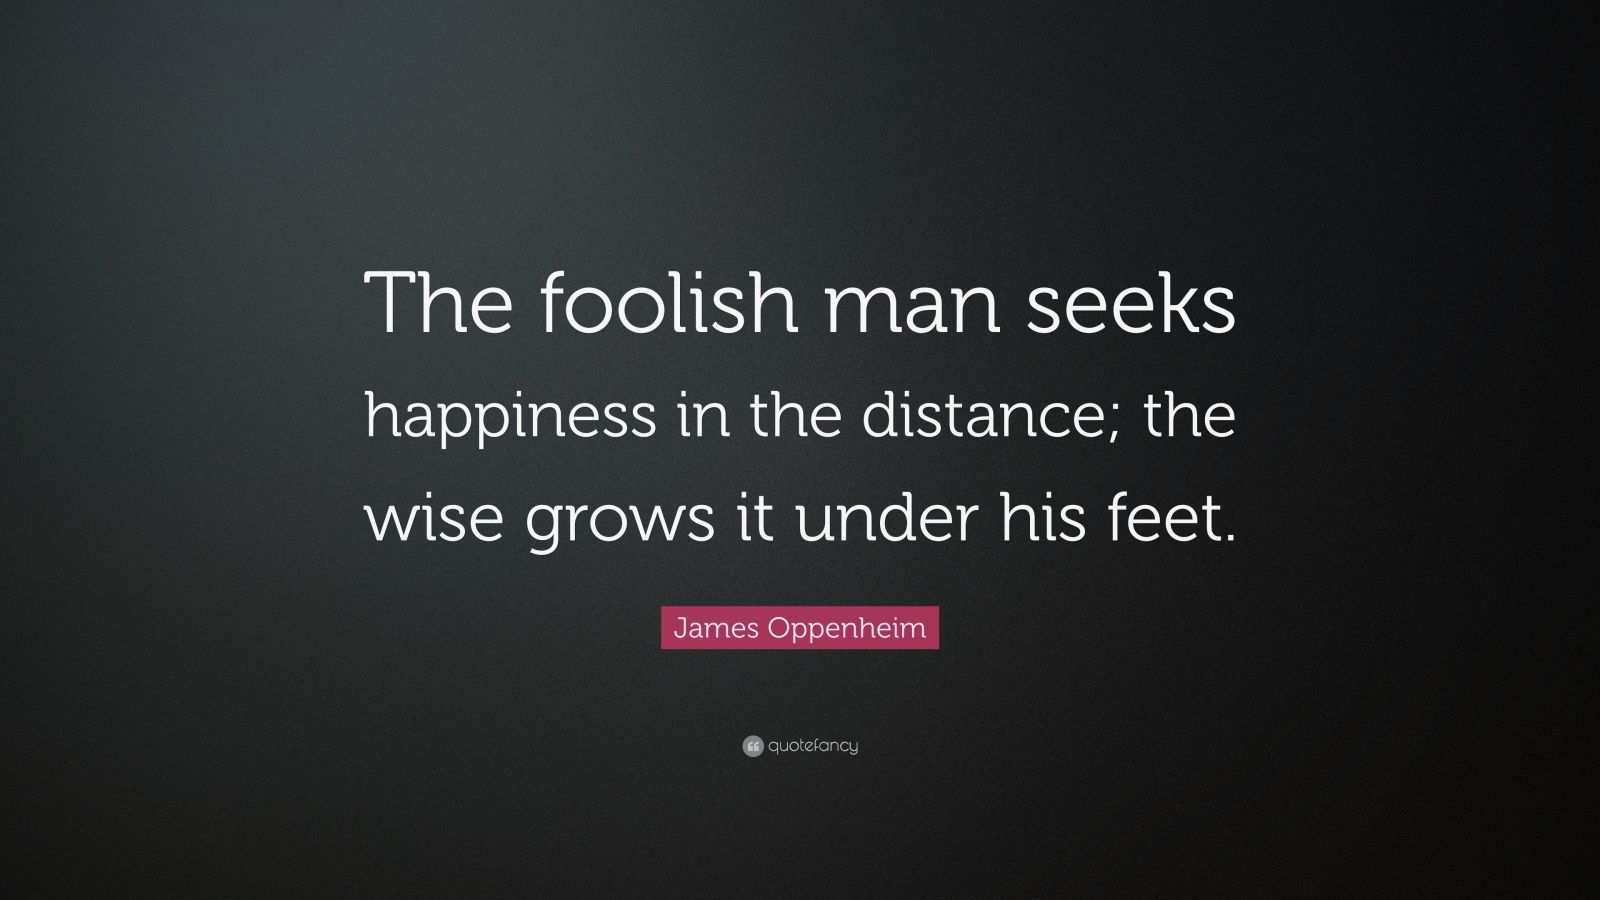 James Oppenheim Quote: “The foolish man seeks happiness in the distance ...